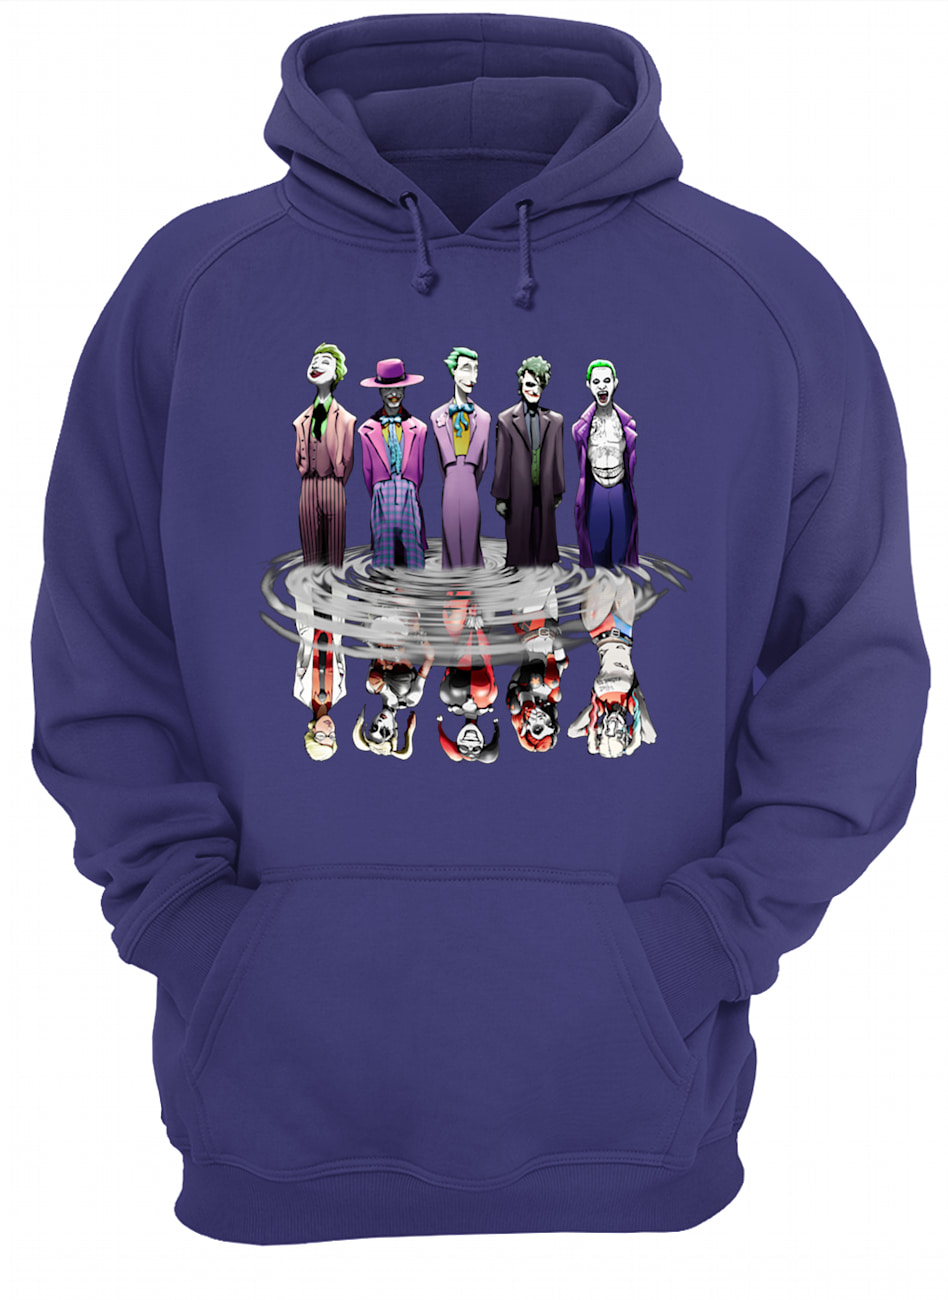 Joker all versions and harley quinn water reflection hoodie